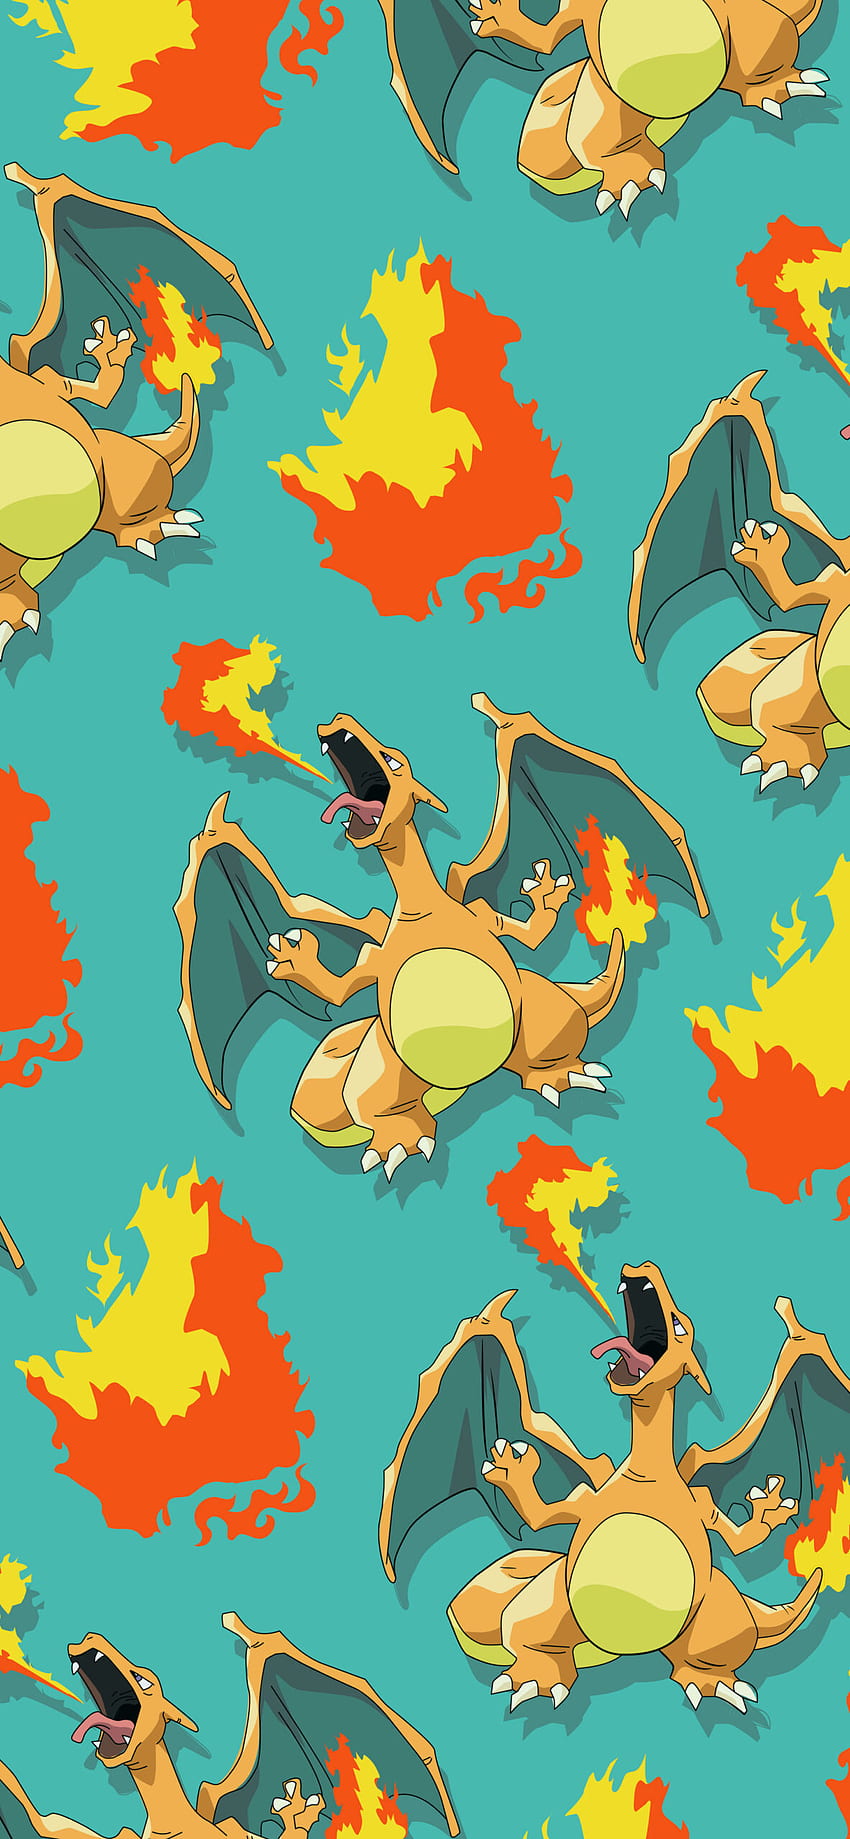 Download Mega Charizard Y Pokémon wallpapers for mobile phone free  Mega Charizard Y Pokémon HD pictures